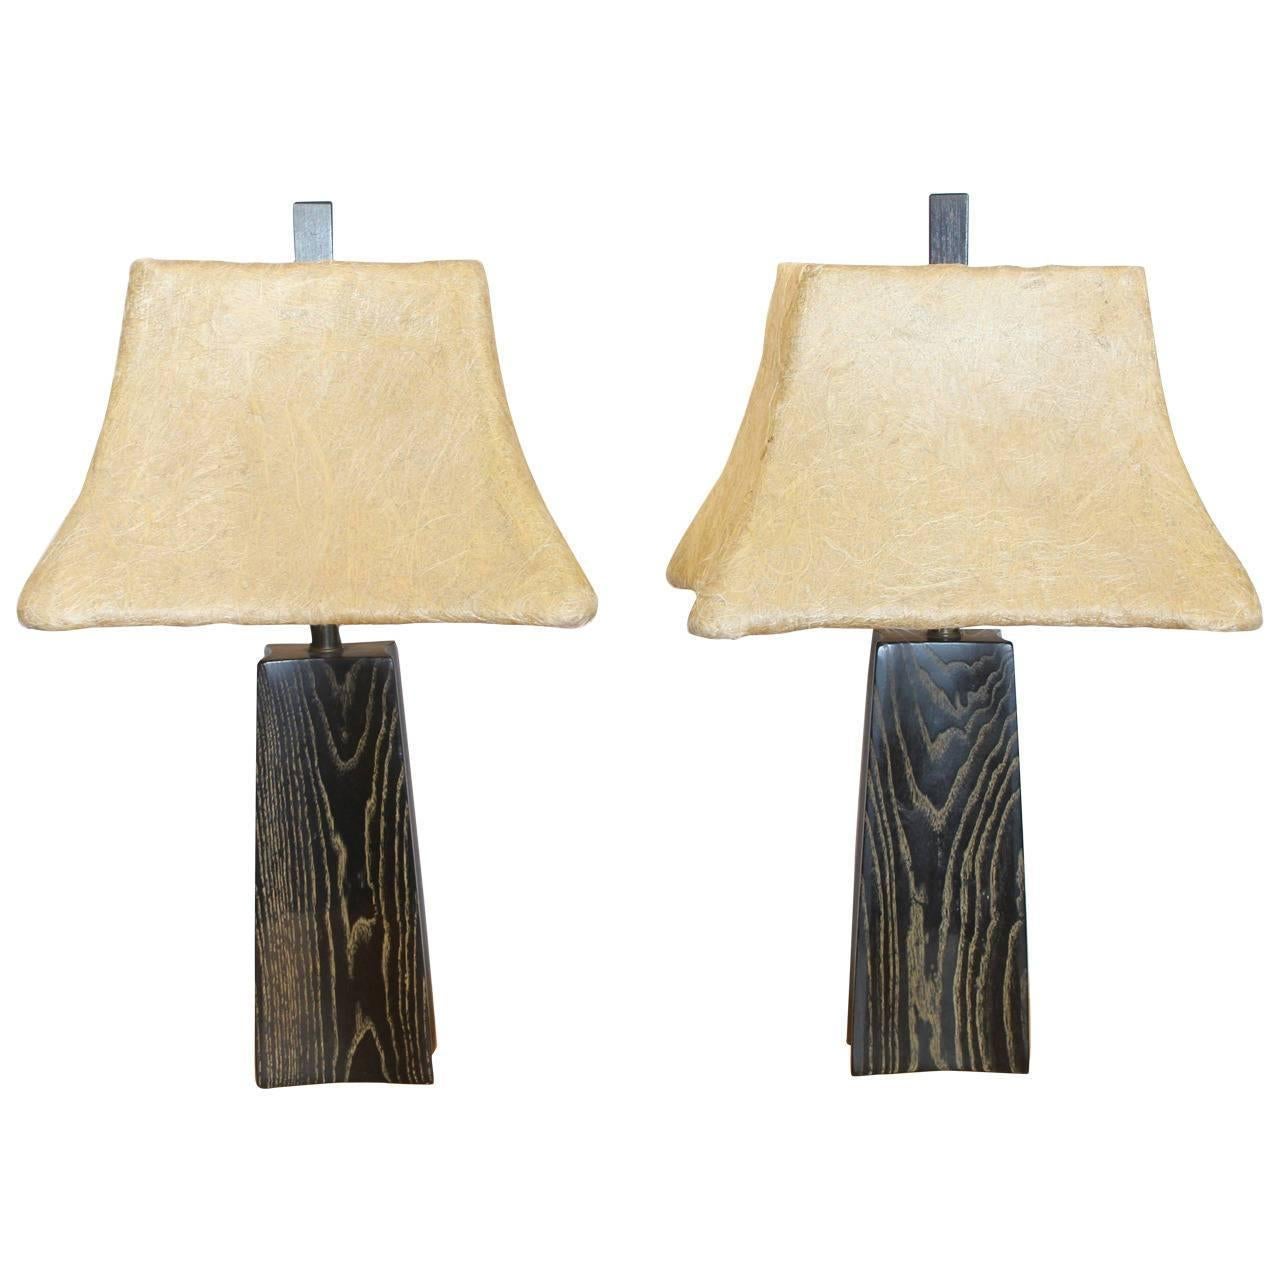 Cerused oak table lamps by James Mont. Original raw silk shades.